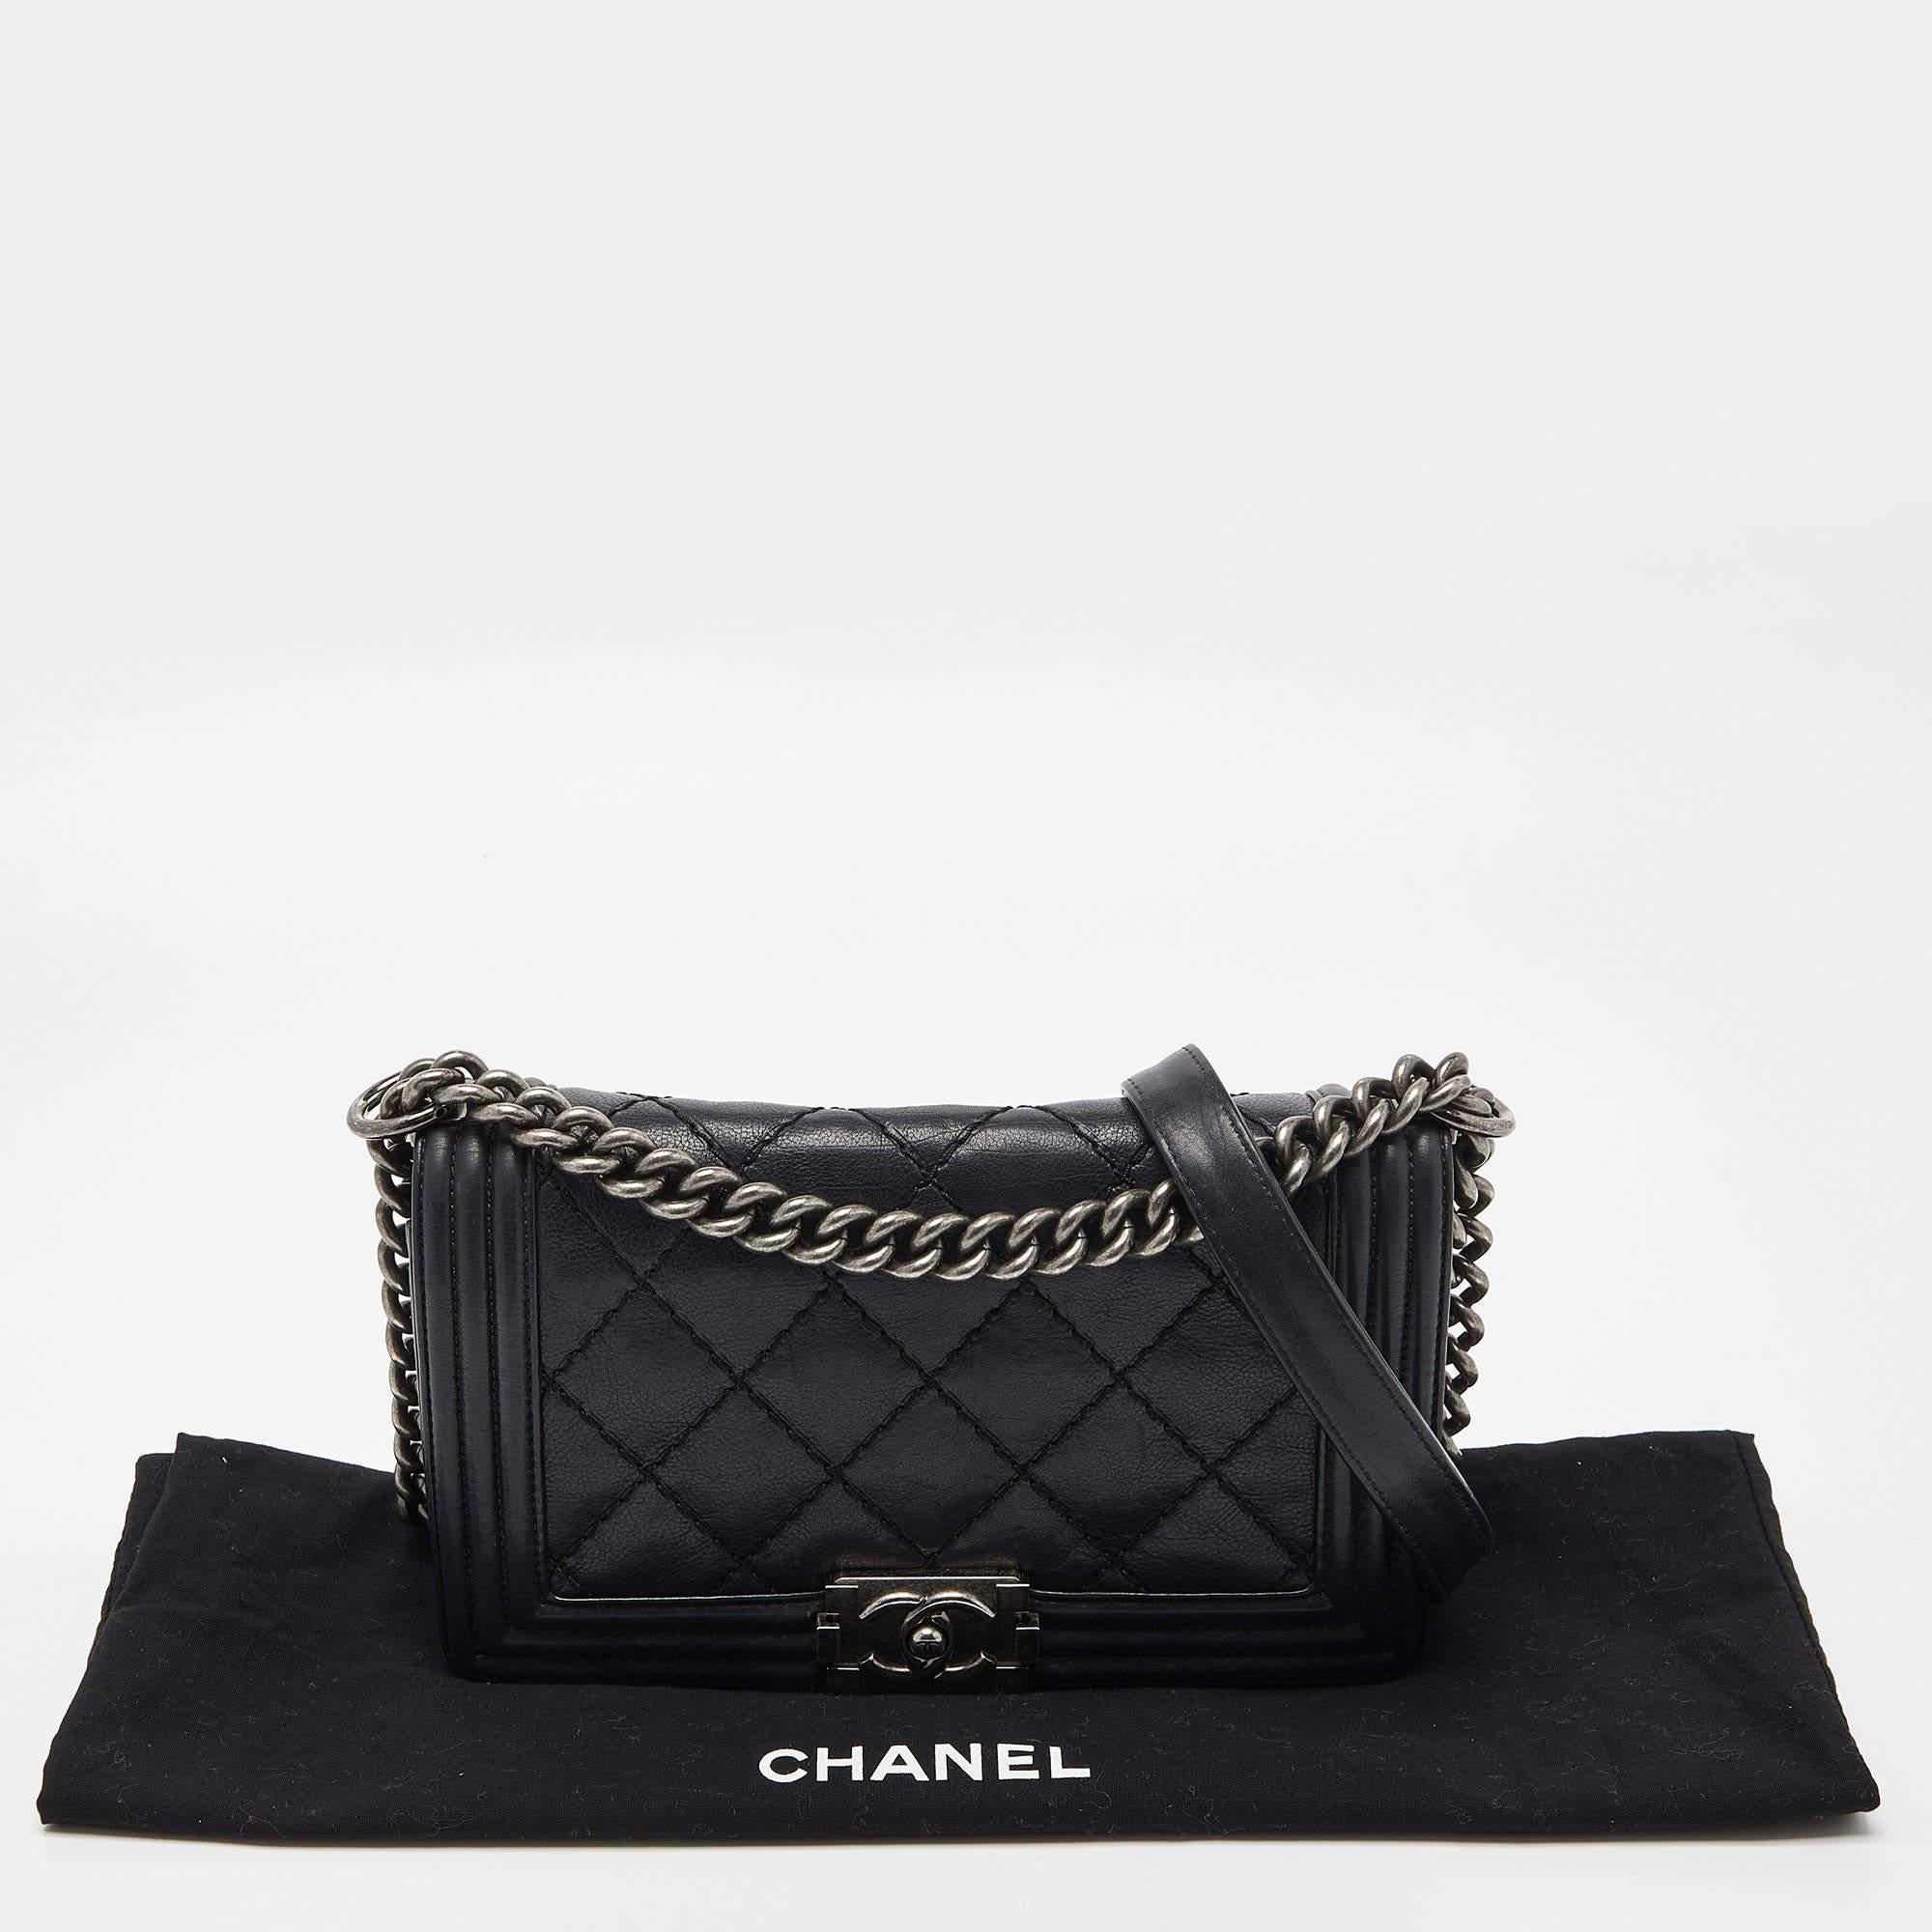 Chanel Black Quilted Leather Medium Double Stitch Boy Flap Bag 8